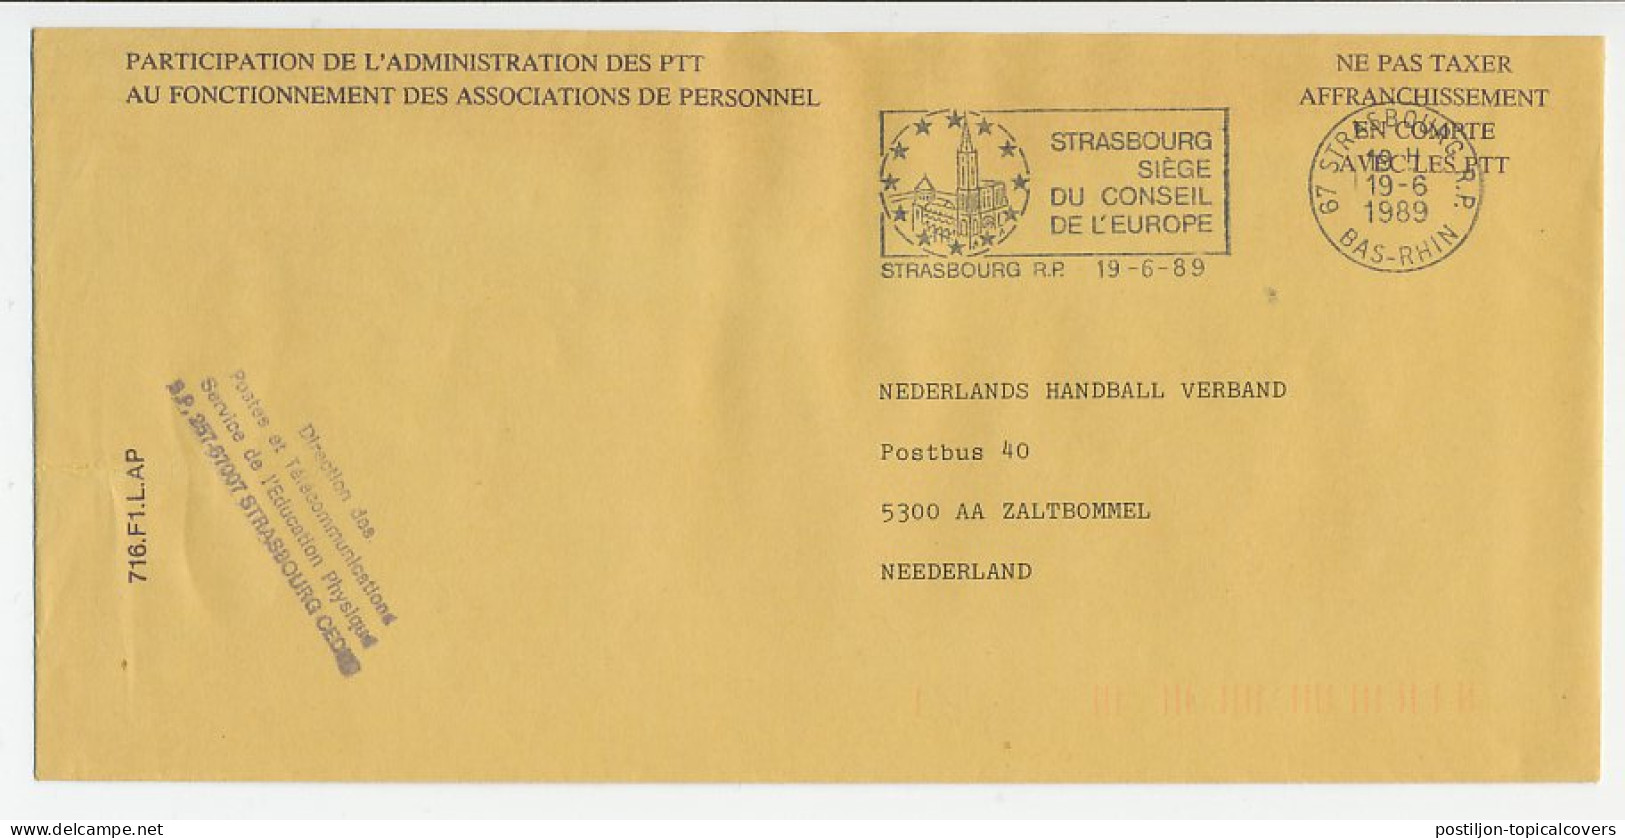 Service Cover / Postmark France 1989 Strasbourg Seat Of The Council Of Europe - Europese Instellingen